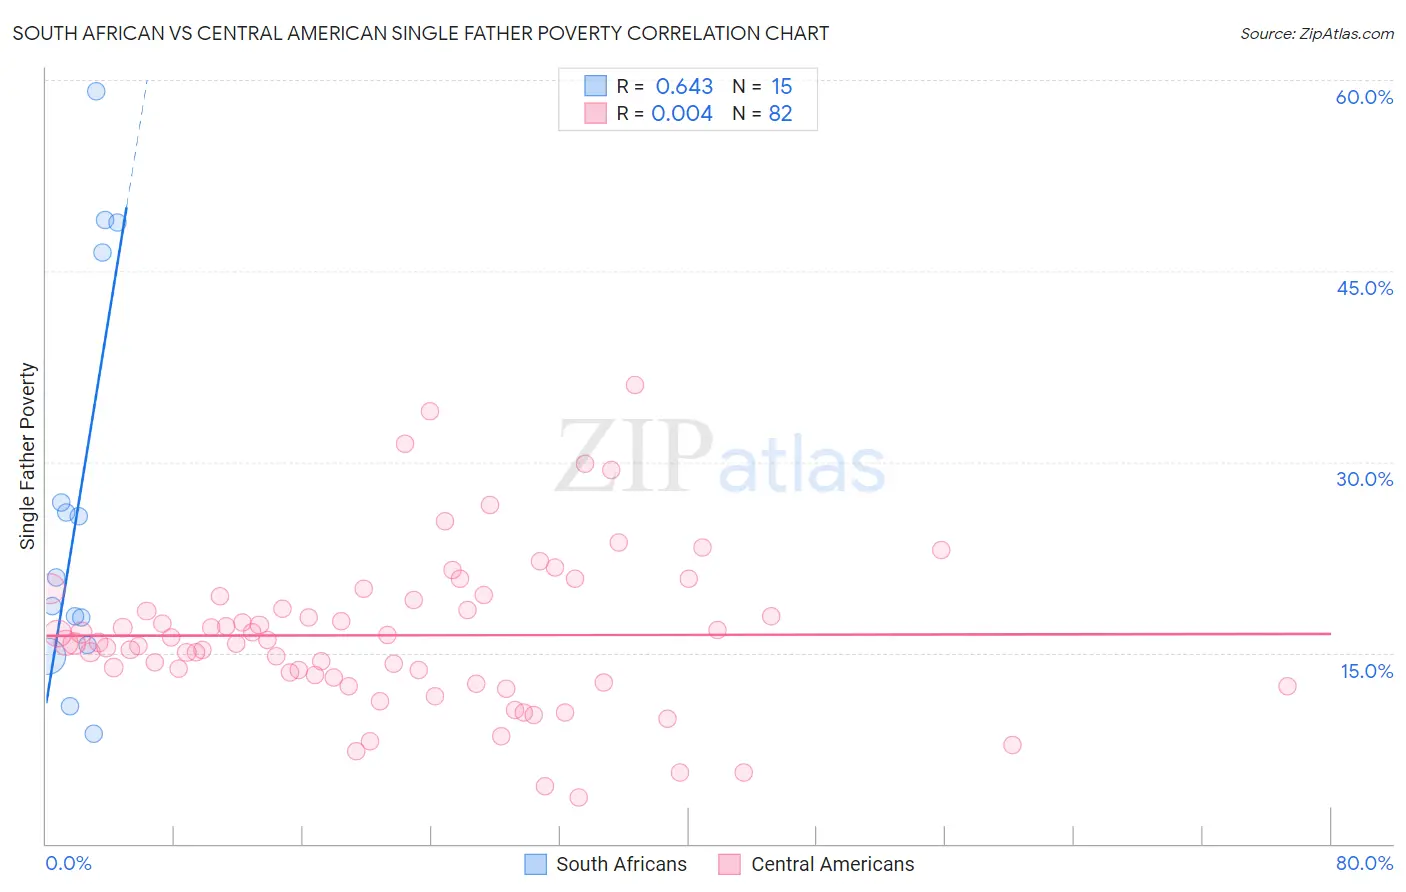 South African vs Central American Single Father Poverty